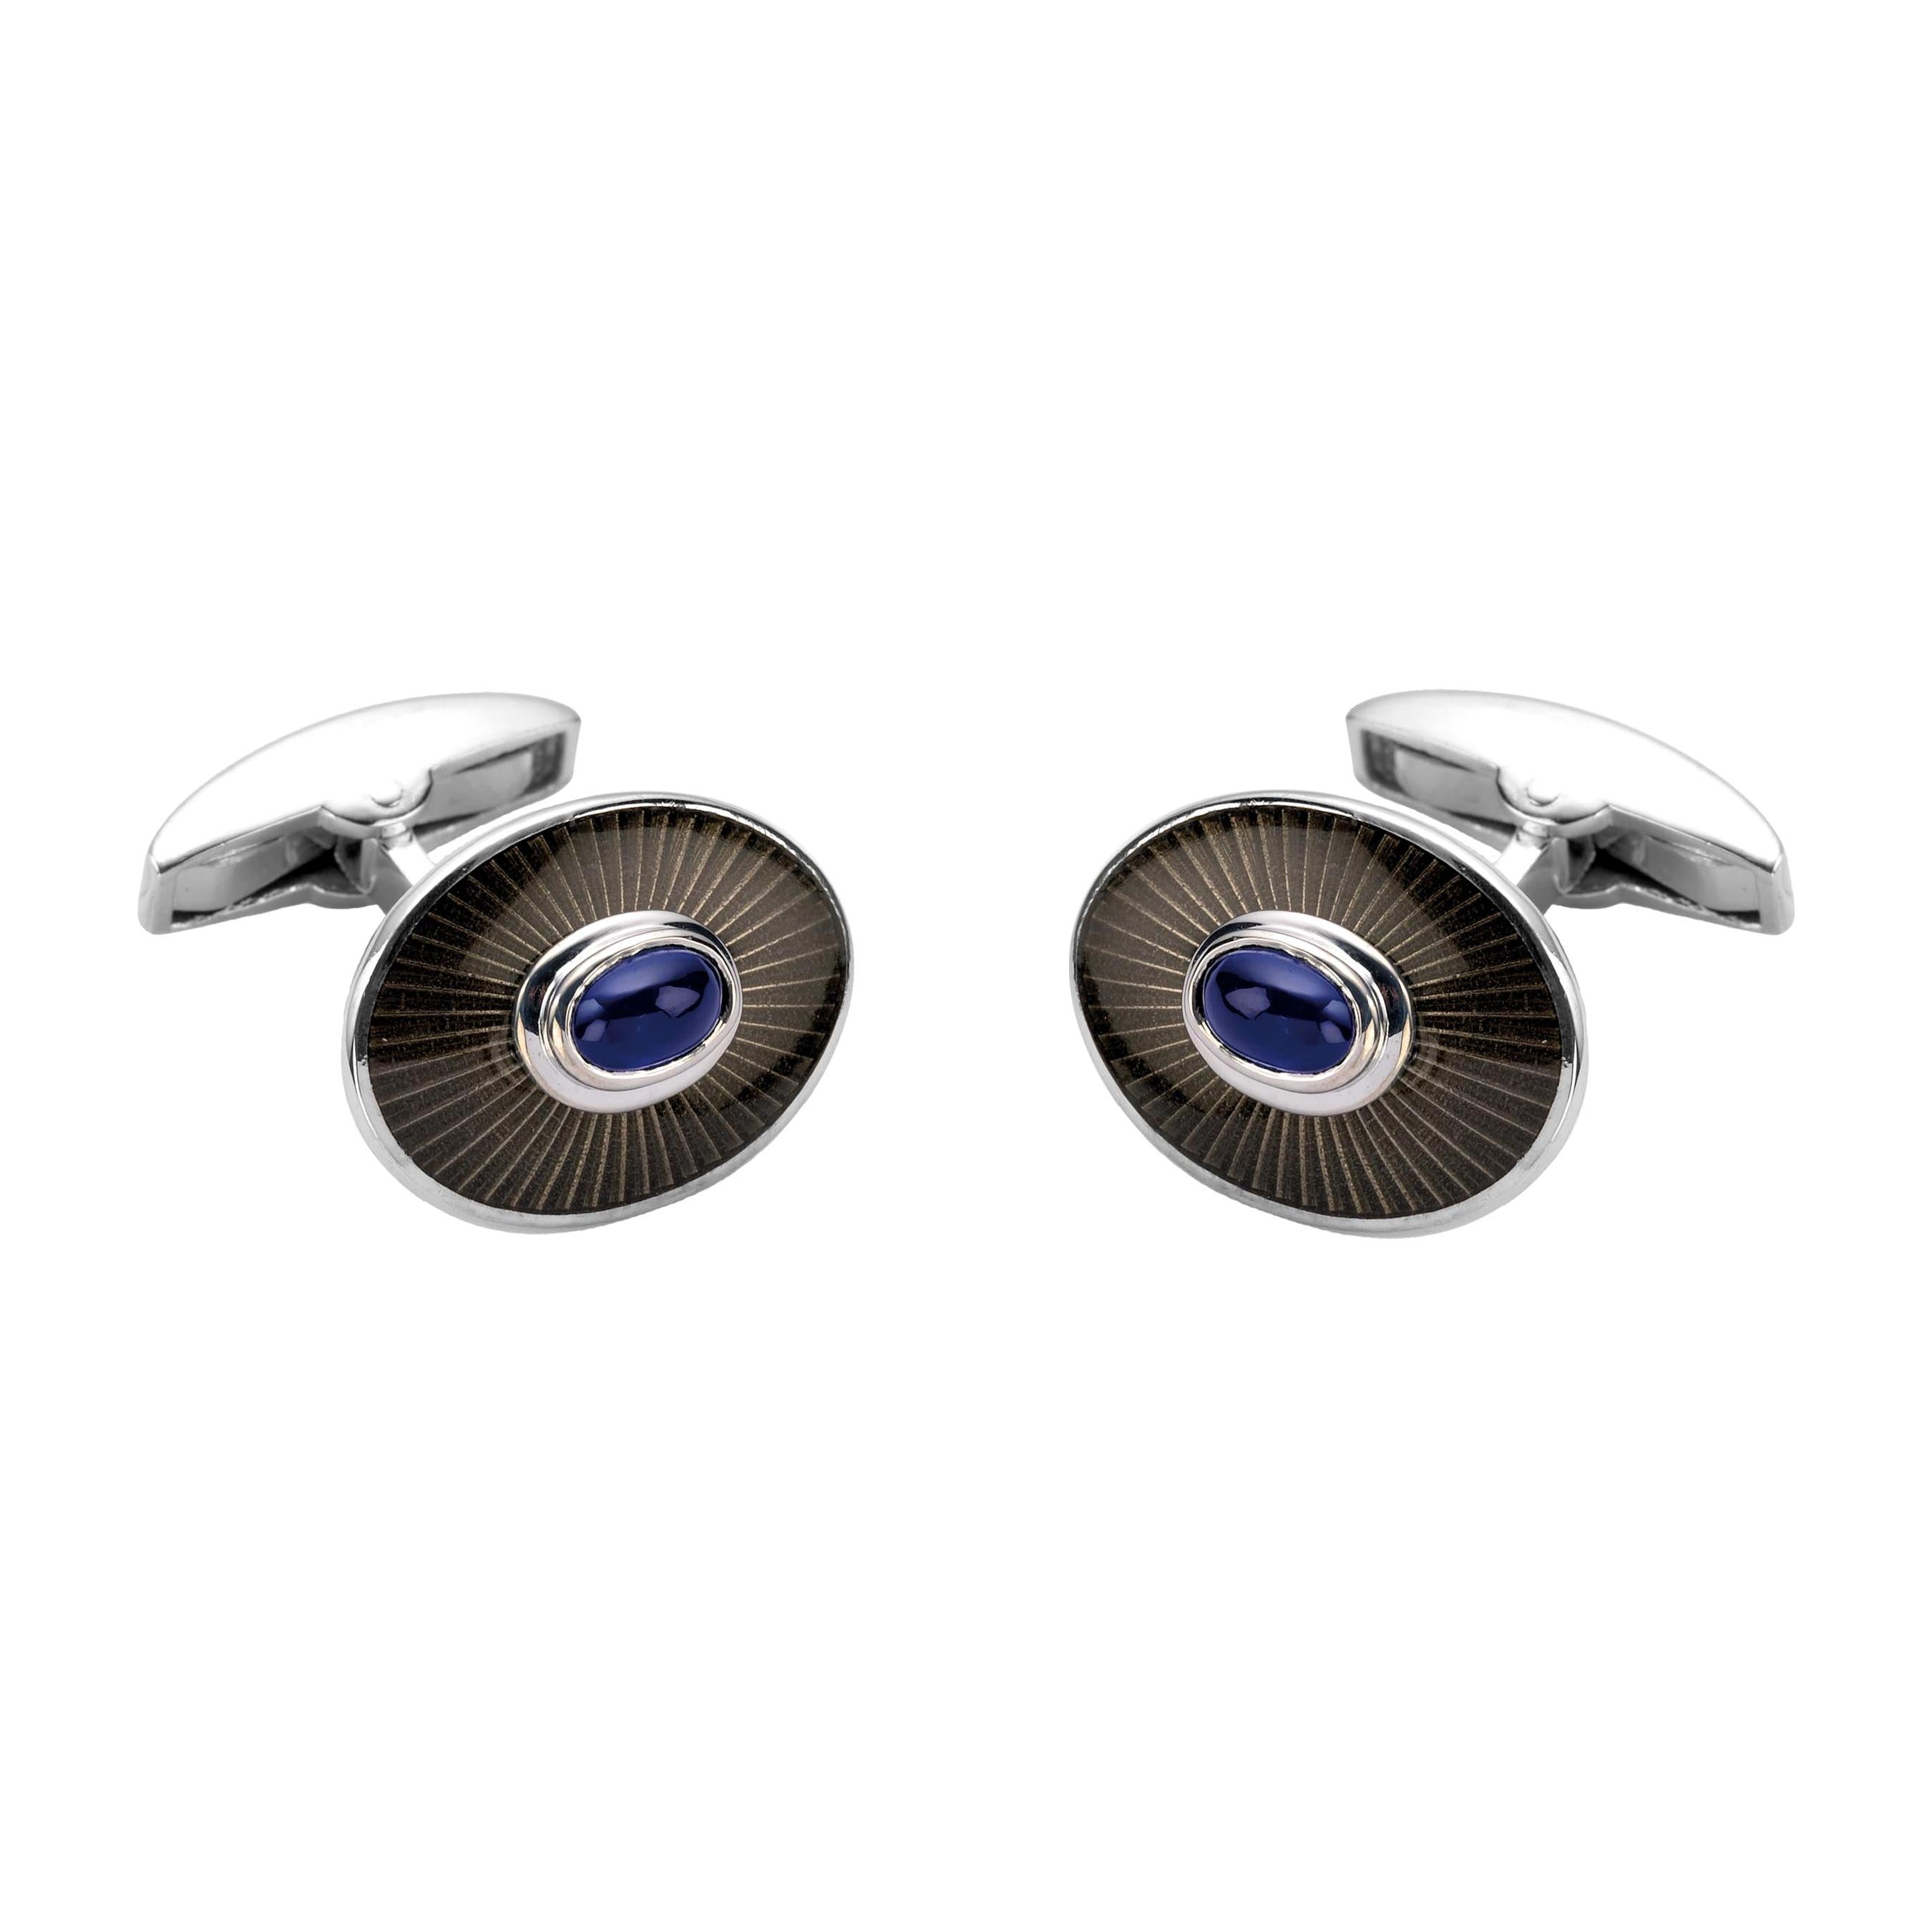 Deakin & Francis 18ct White Gold Enamel Cufflinks with Sapphire Cabochon Centre For Sale